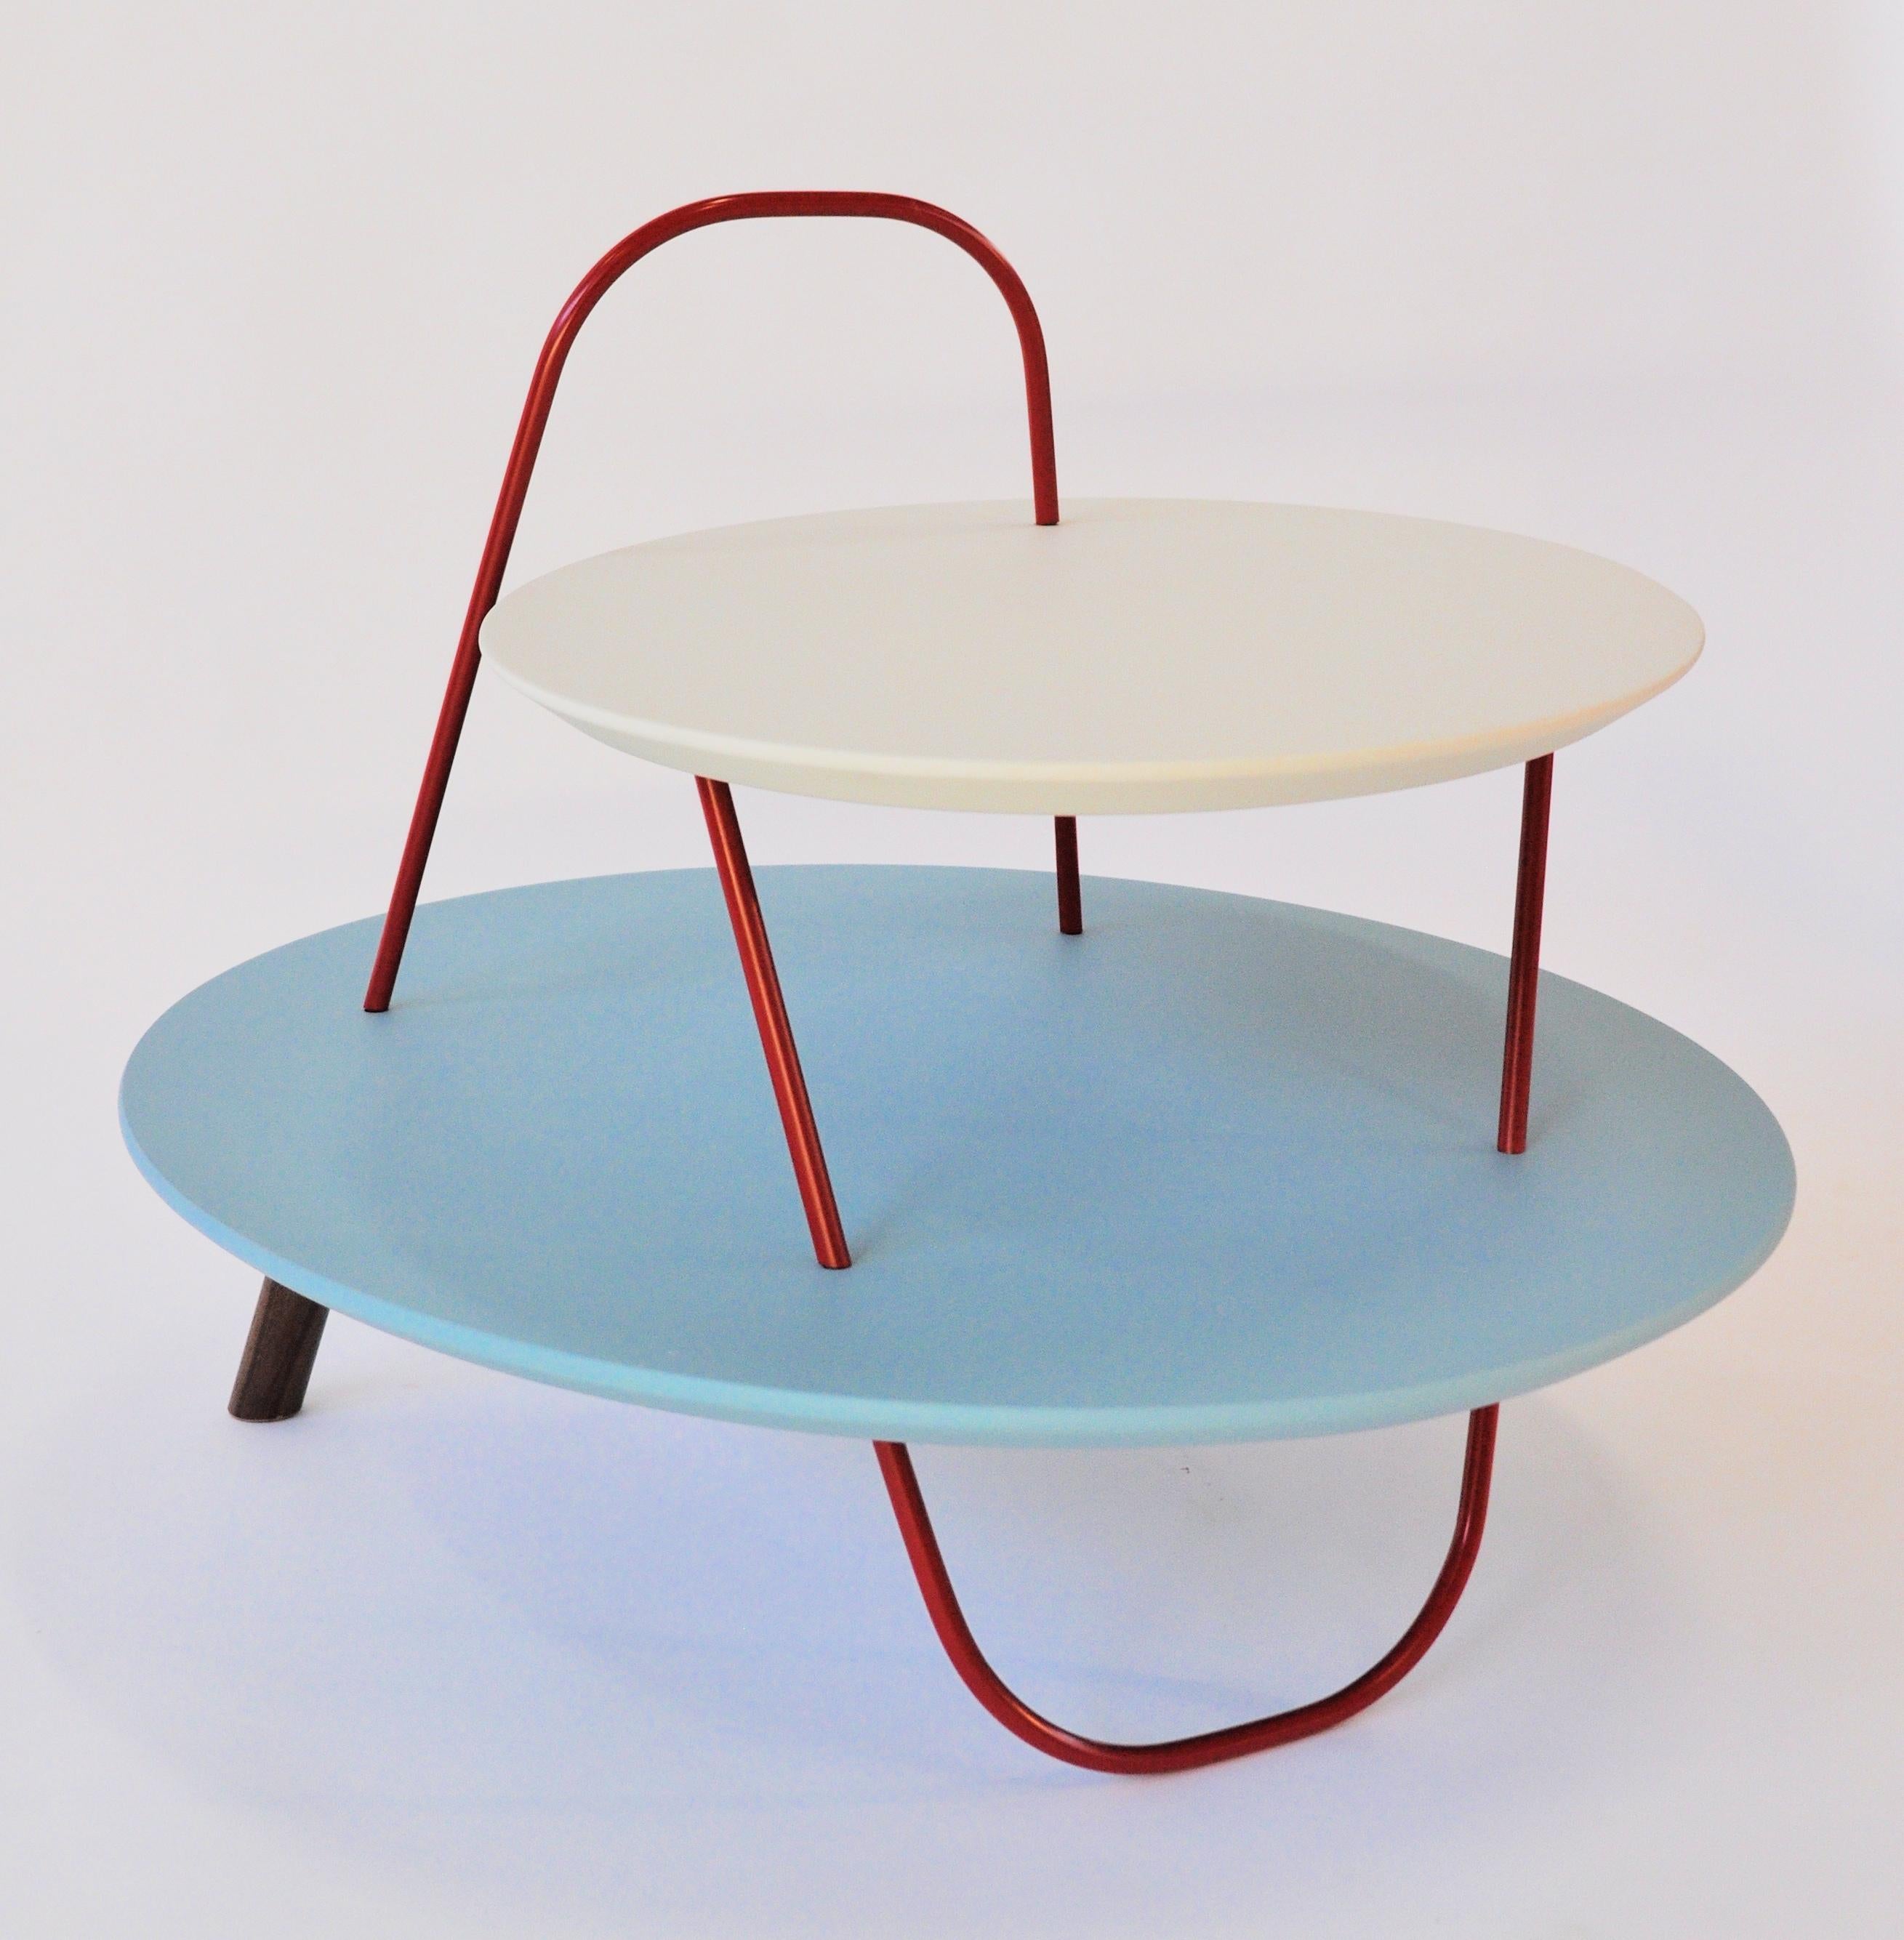 As free trajectories in space, metal structures create winding geometries. Orbit is a family of tables with a unique image. Curved tubulars cross - on several levels – with circular or elliptical wooden tops. Orbit can be a contemporary table, a